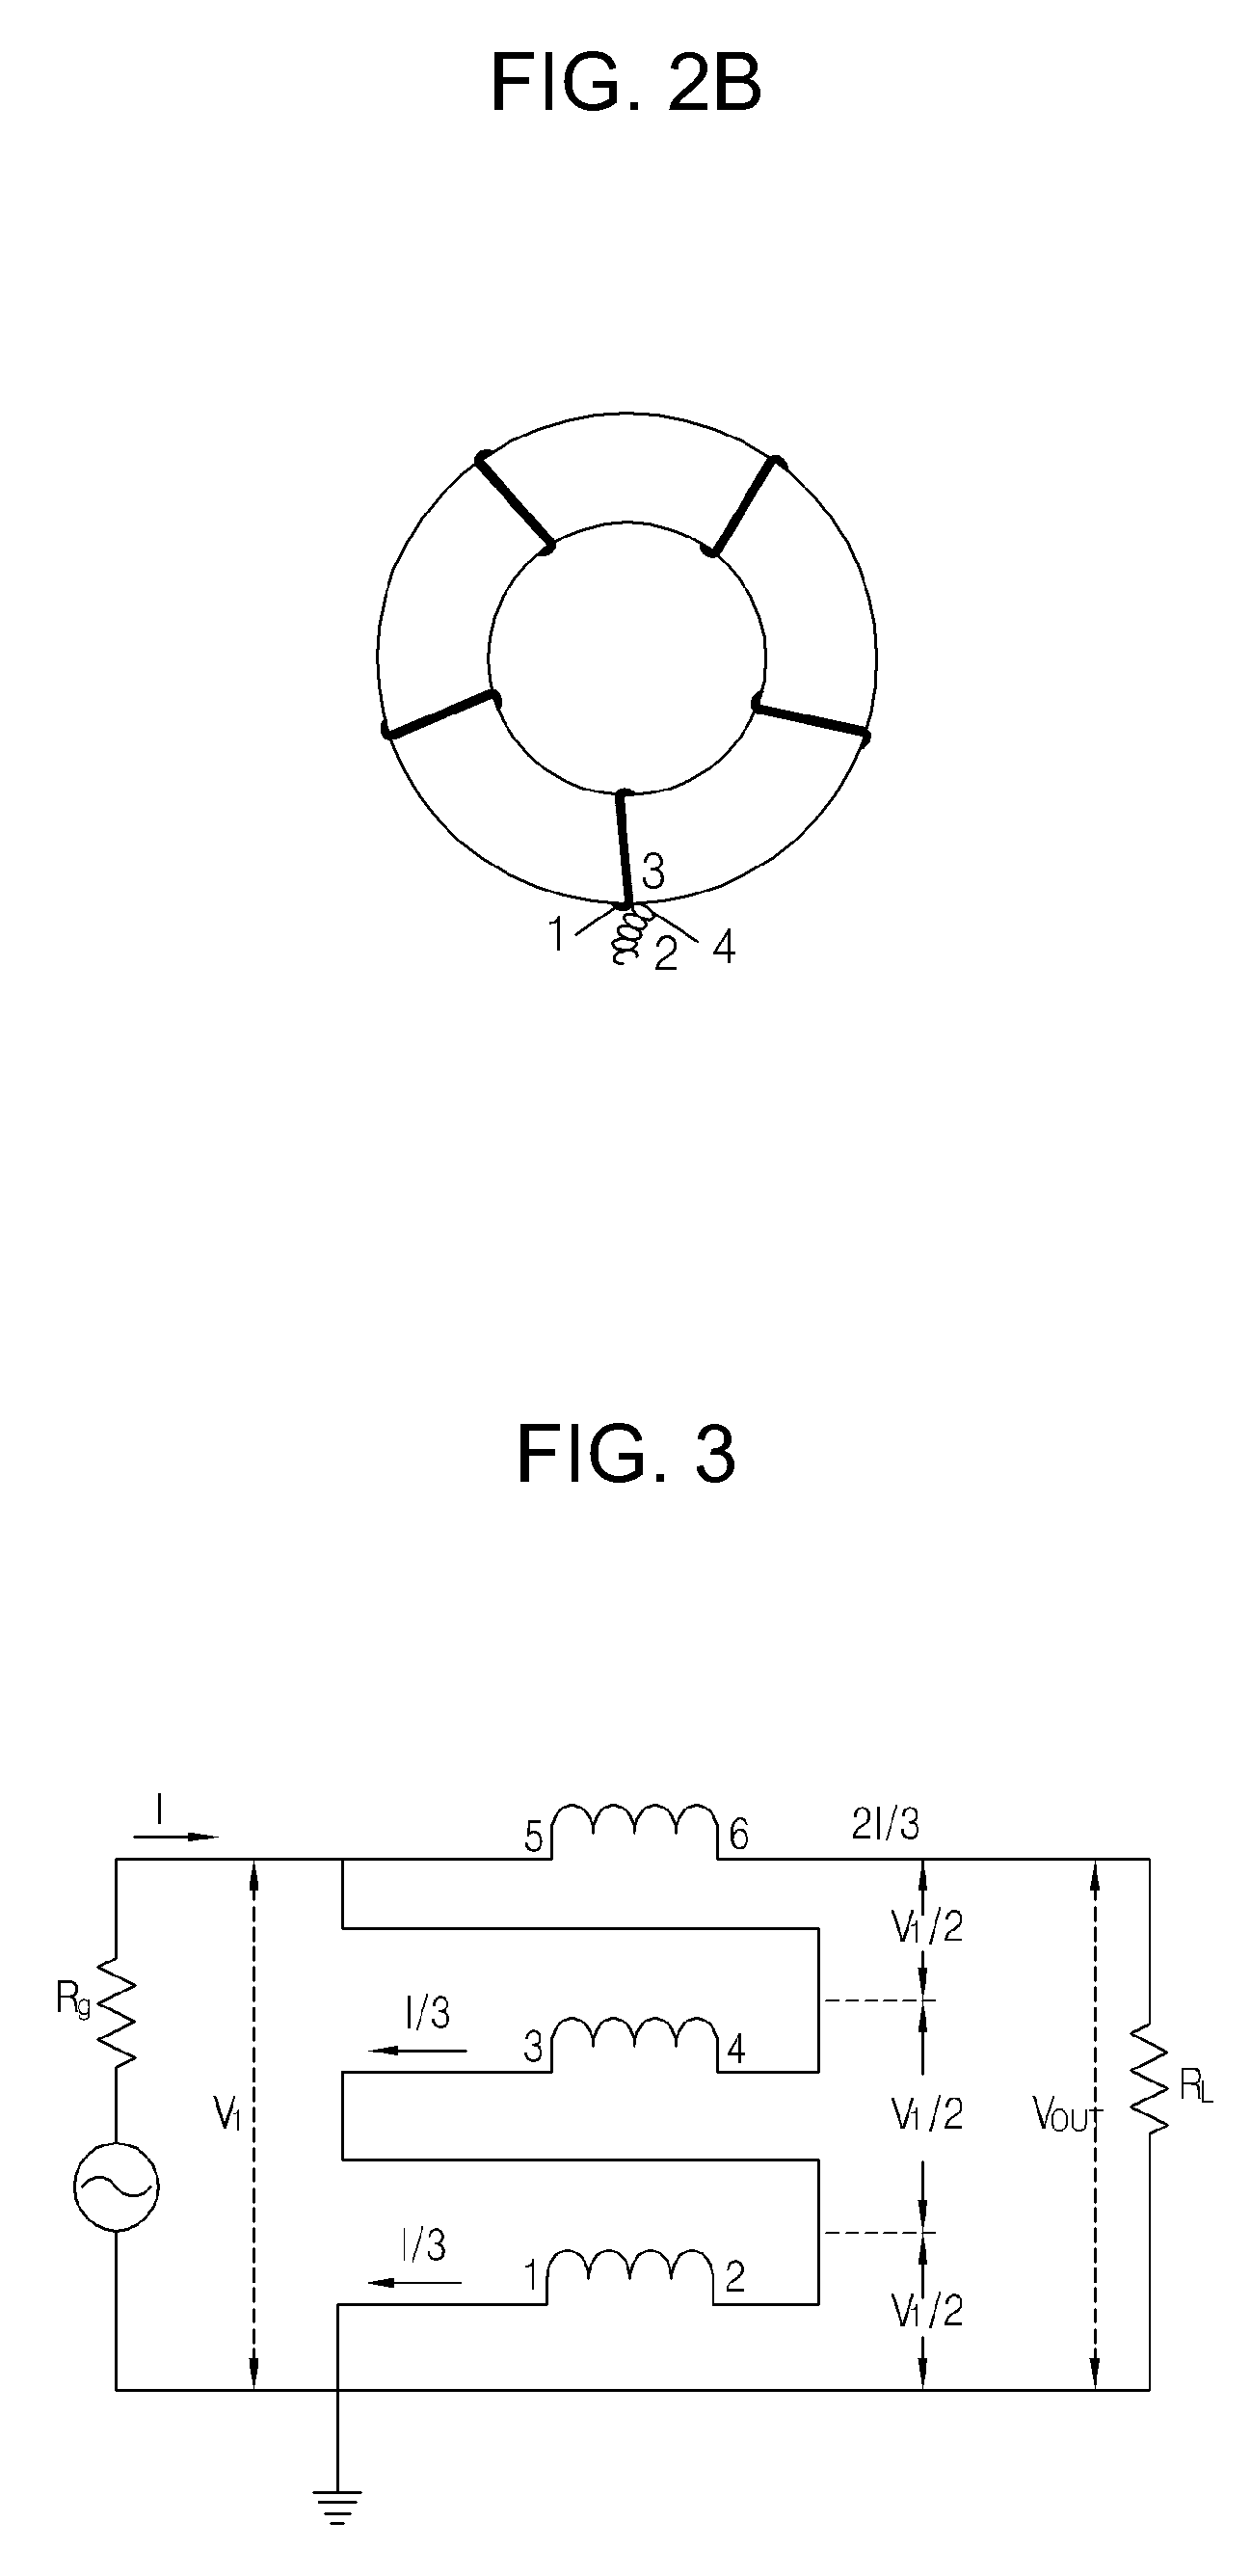 Signal Coupling Apparatus For Power Line Communications Using A Three-Phase Four-Wire Power Line